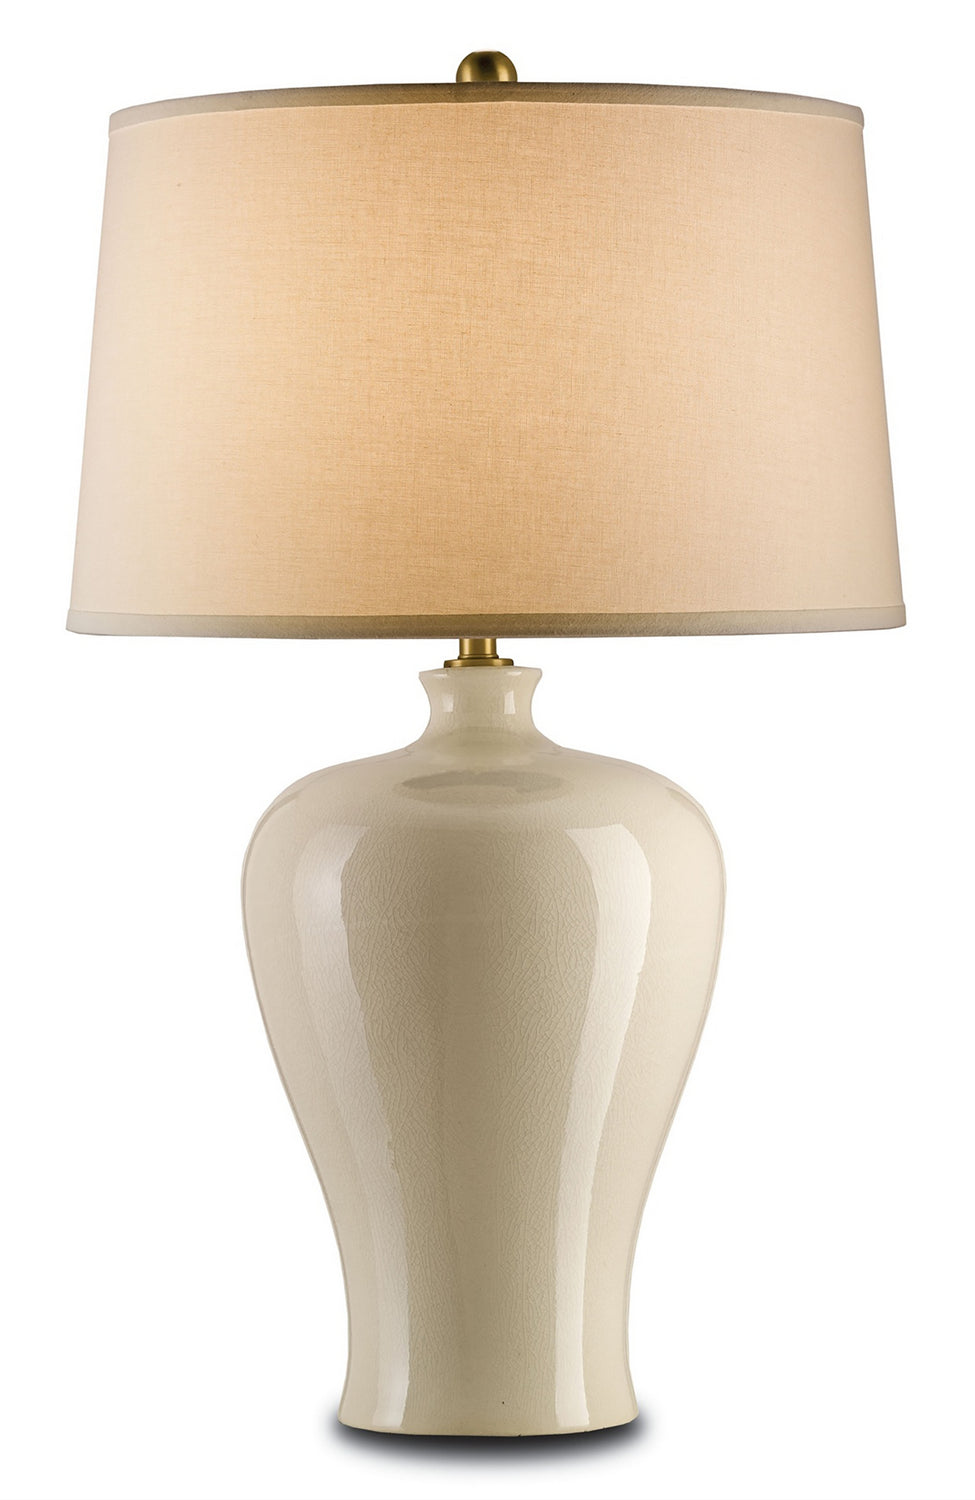 One Light Table Lamp from the Blaise collection in Cream Crackle finish